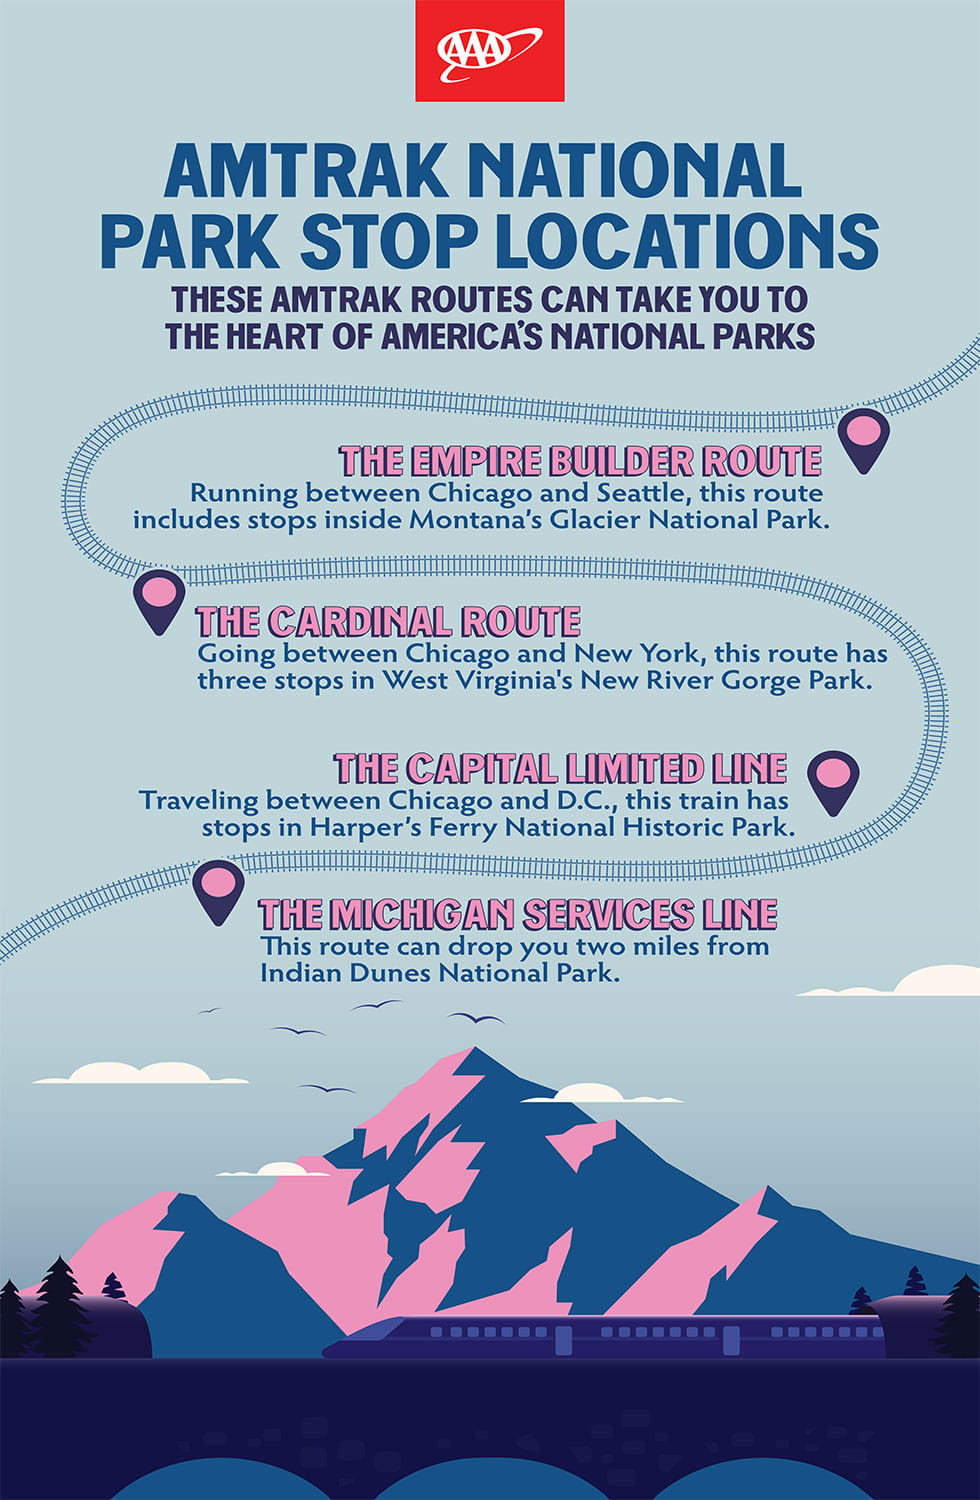 AAA infographic on national parks accessible via Amtrak